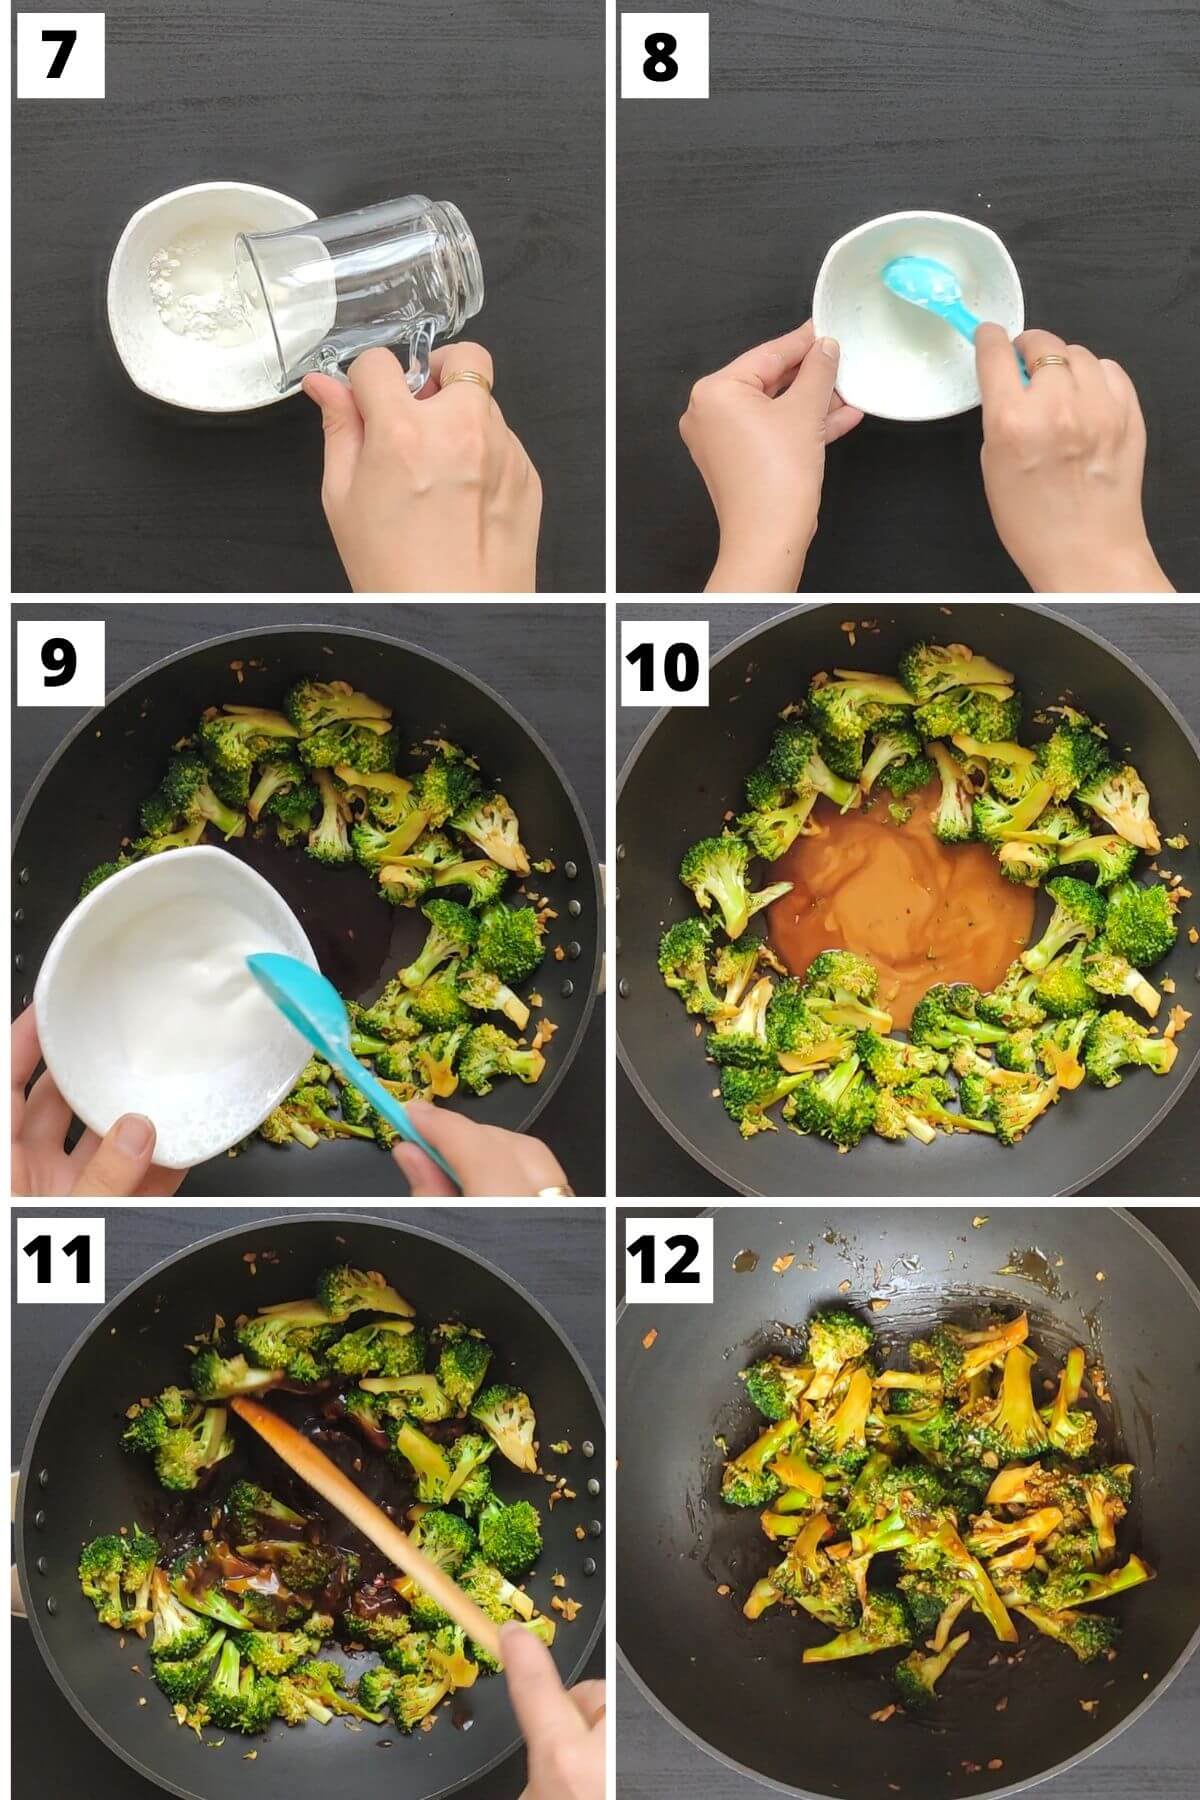 Steps 7 to 12 for making Asian style garlic broccoli 